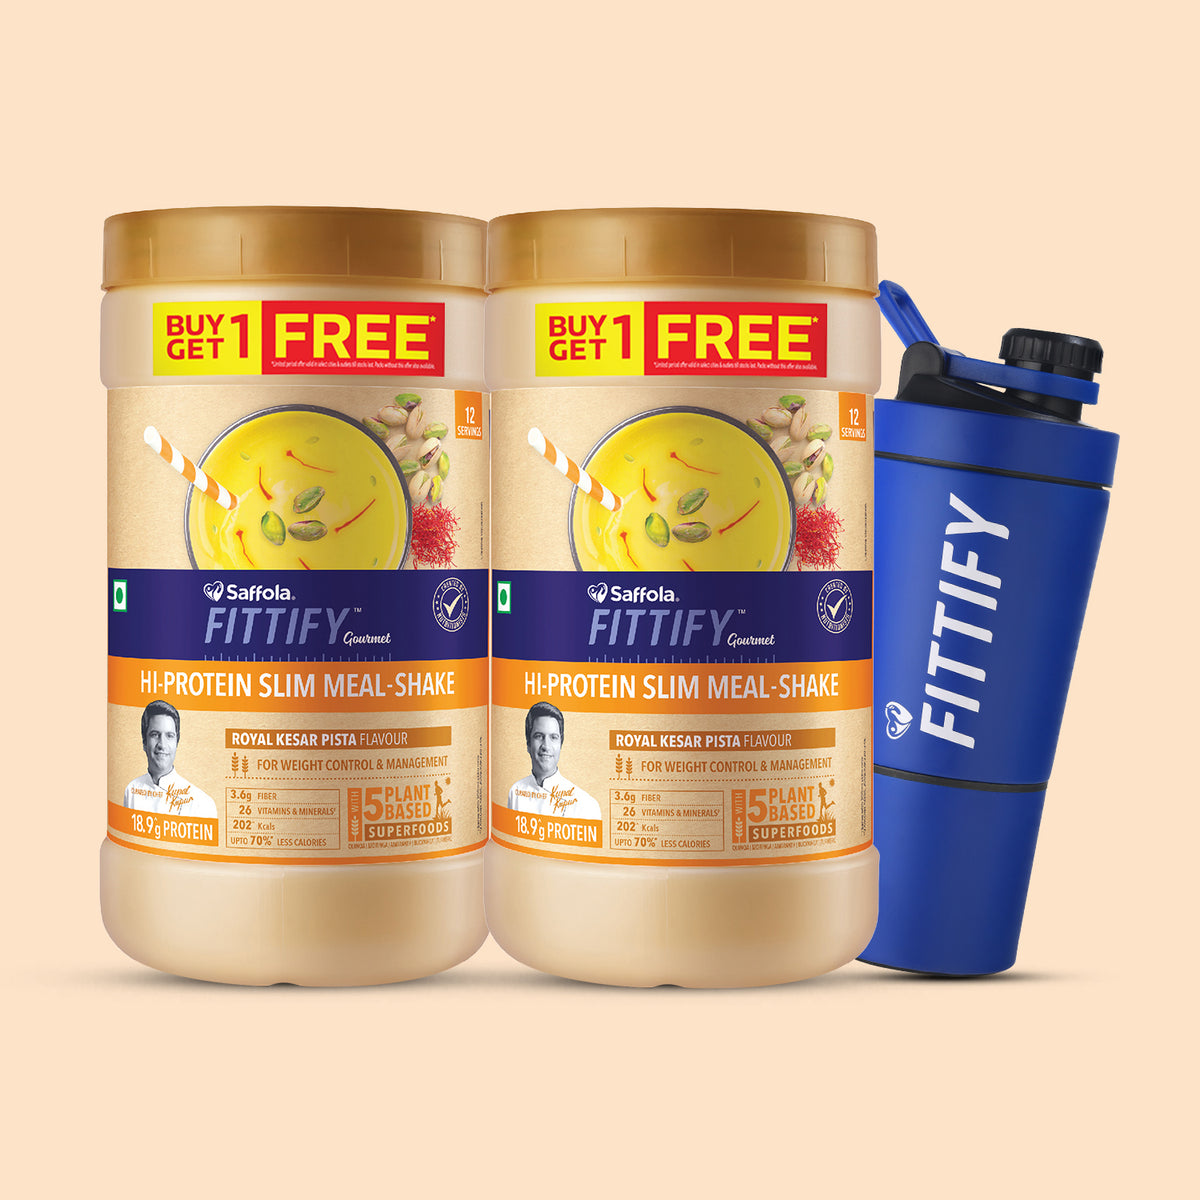 [SALE] Saffola Fittify Hi-Protein Slim Meal Shake Royal Kesar Pista BOGO + Metal Blue Shaker With Compartment 500ml Combo